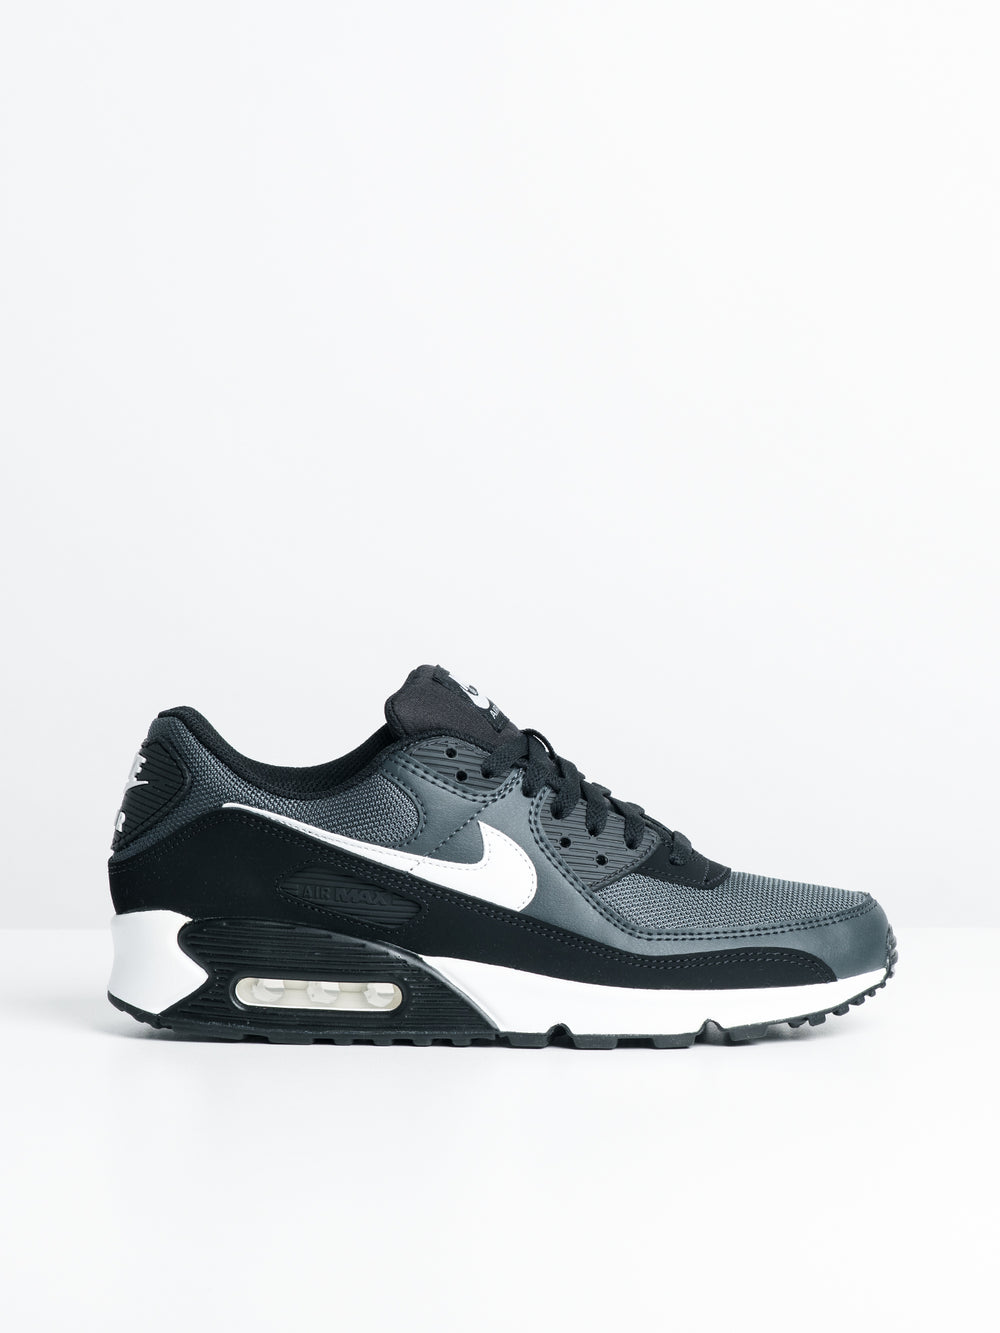 CHAUSSURES AIR MAX 90 POUR HOMME